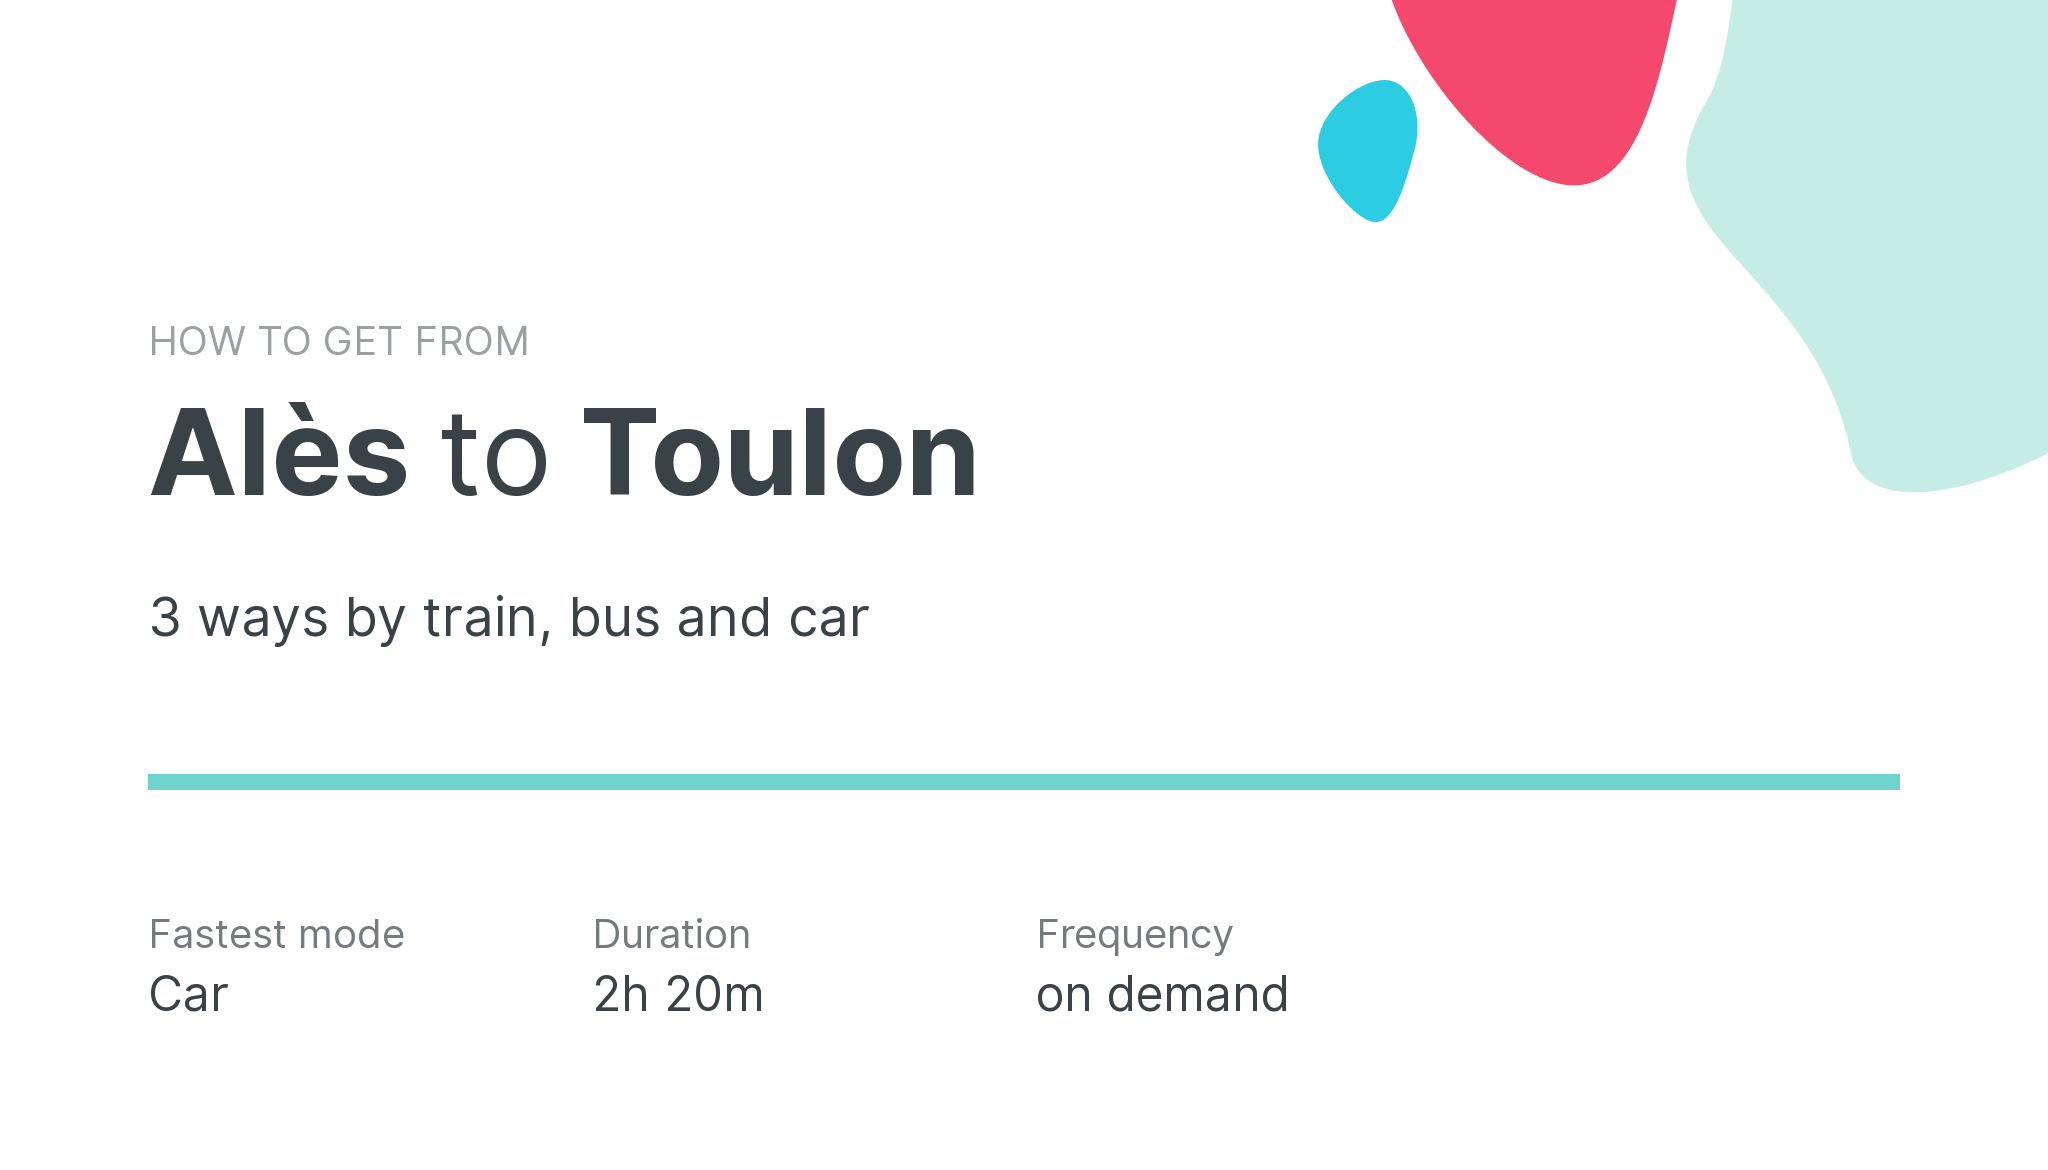 How do I get from Alès to Toulon